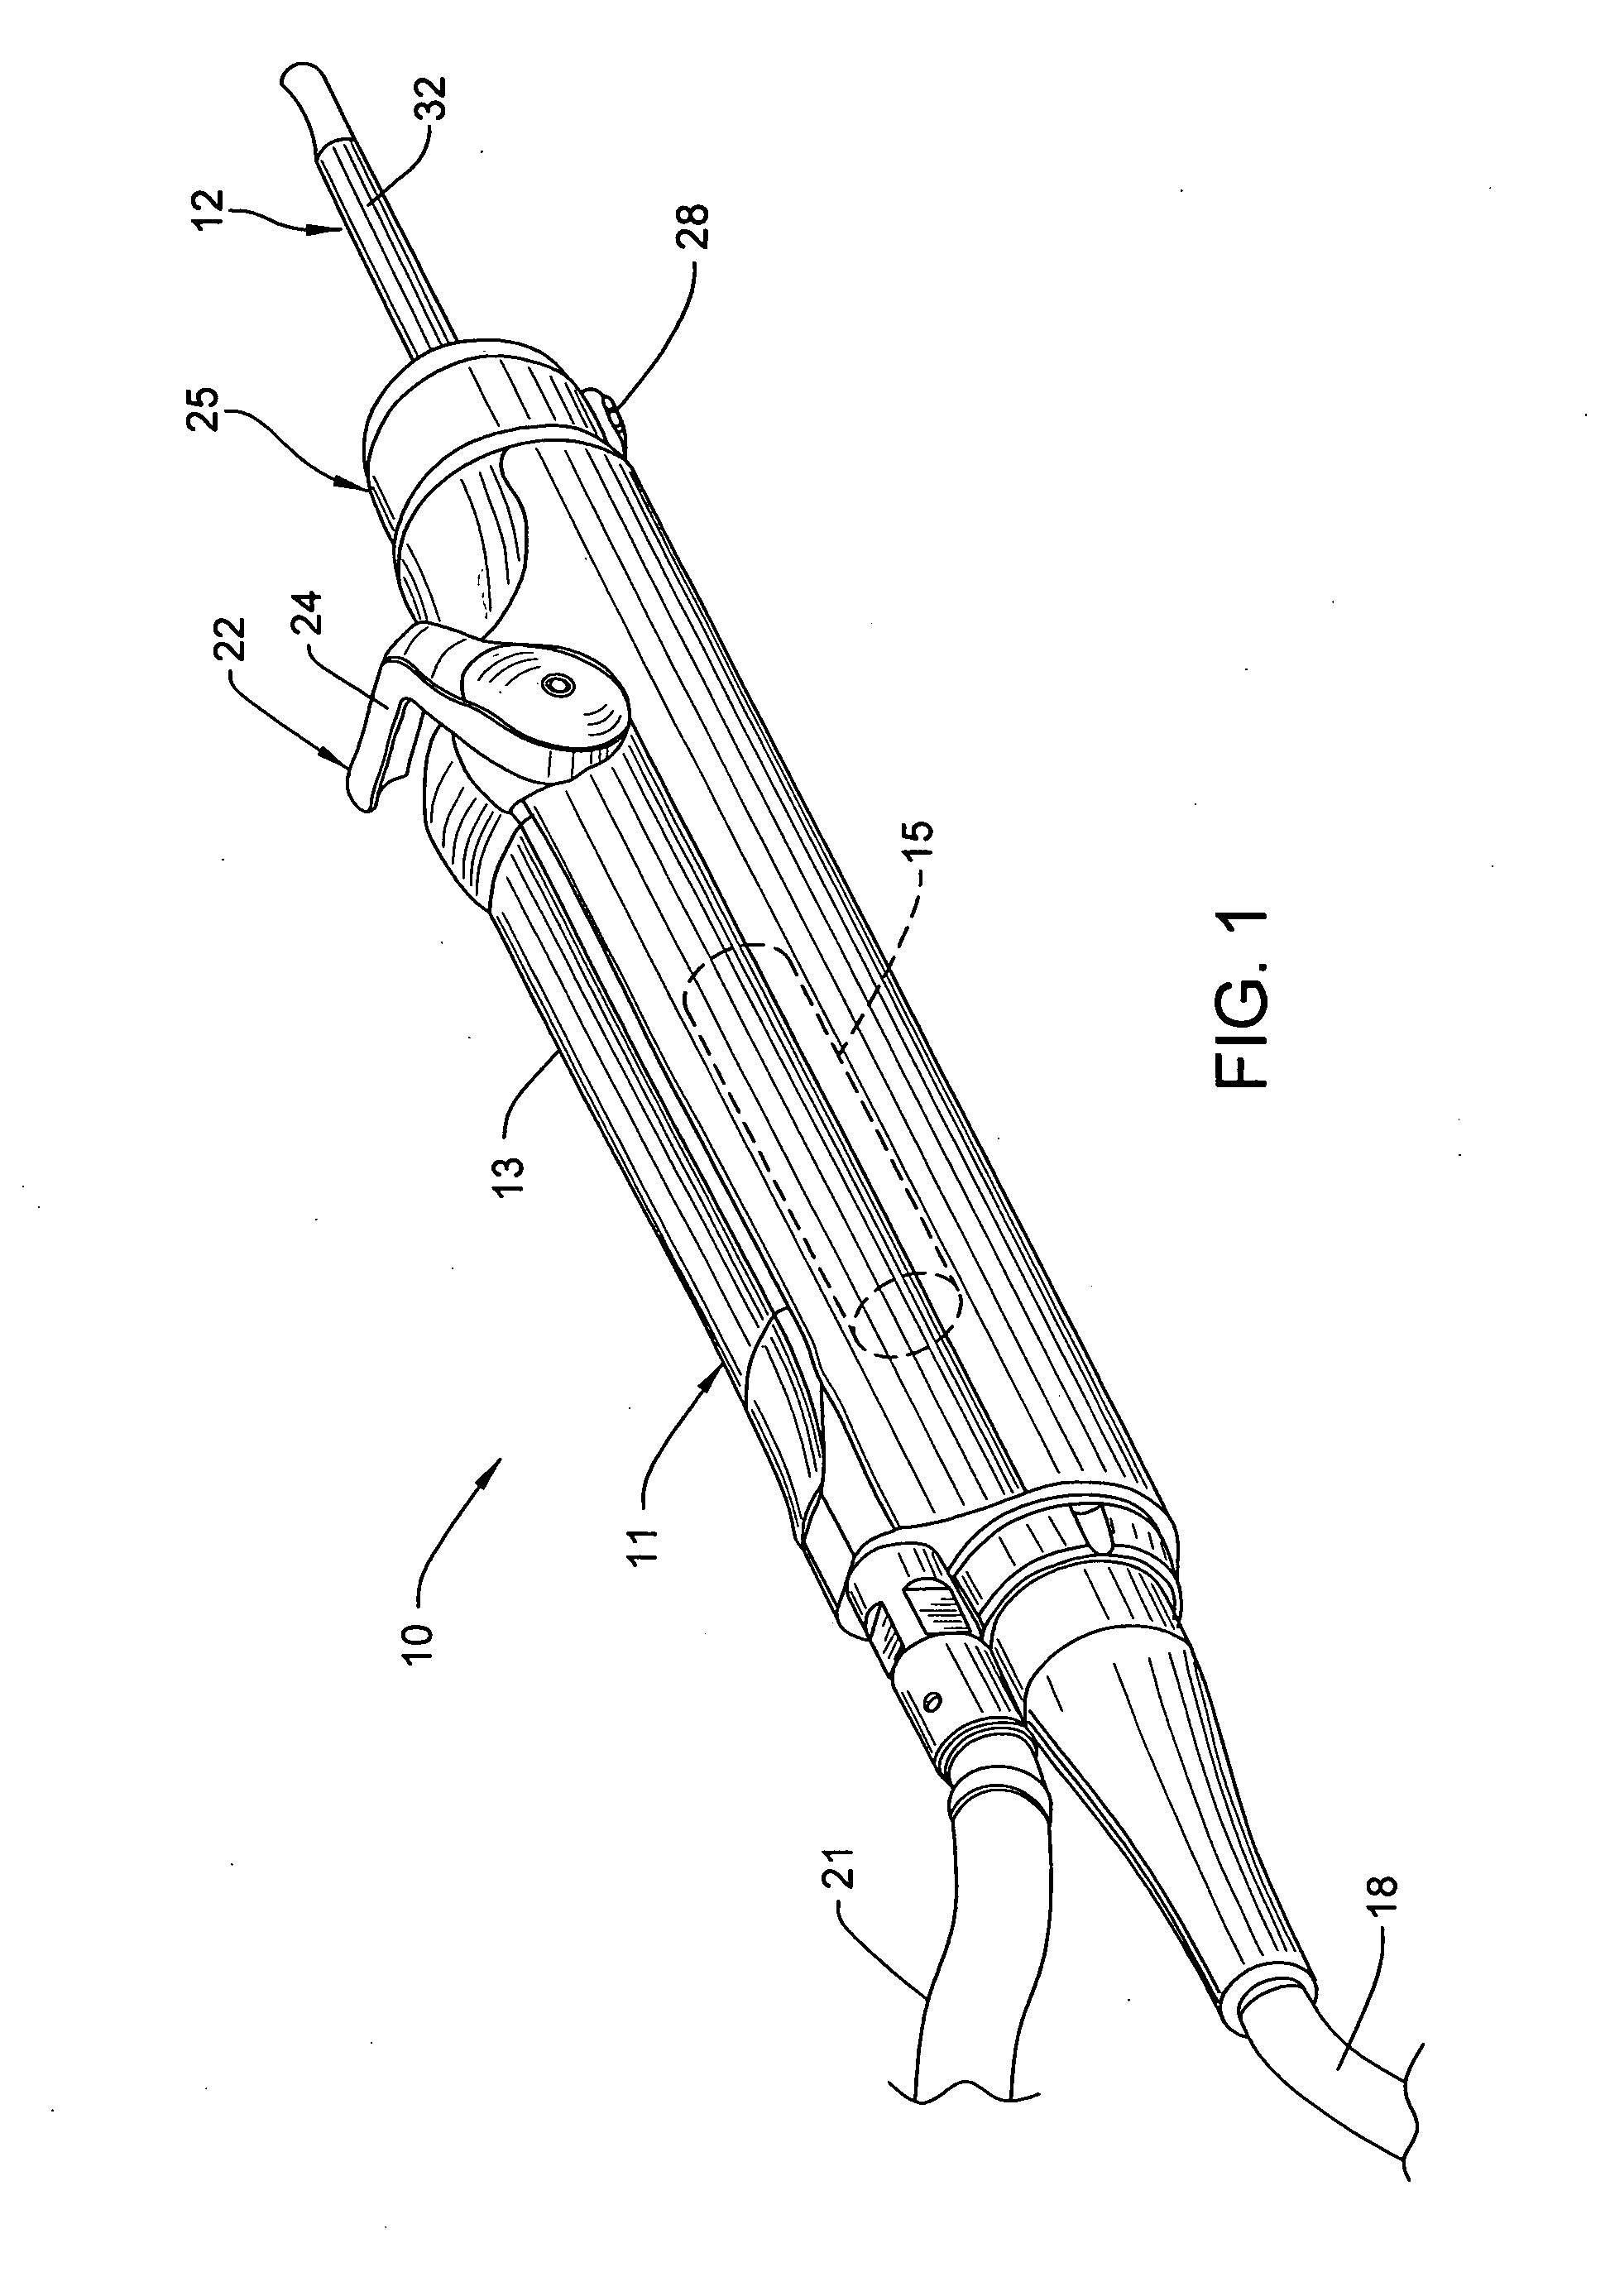 Surgical tool arrangement and surgical cutting accessory for use therewith